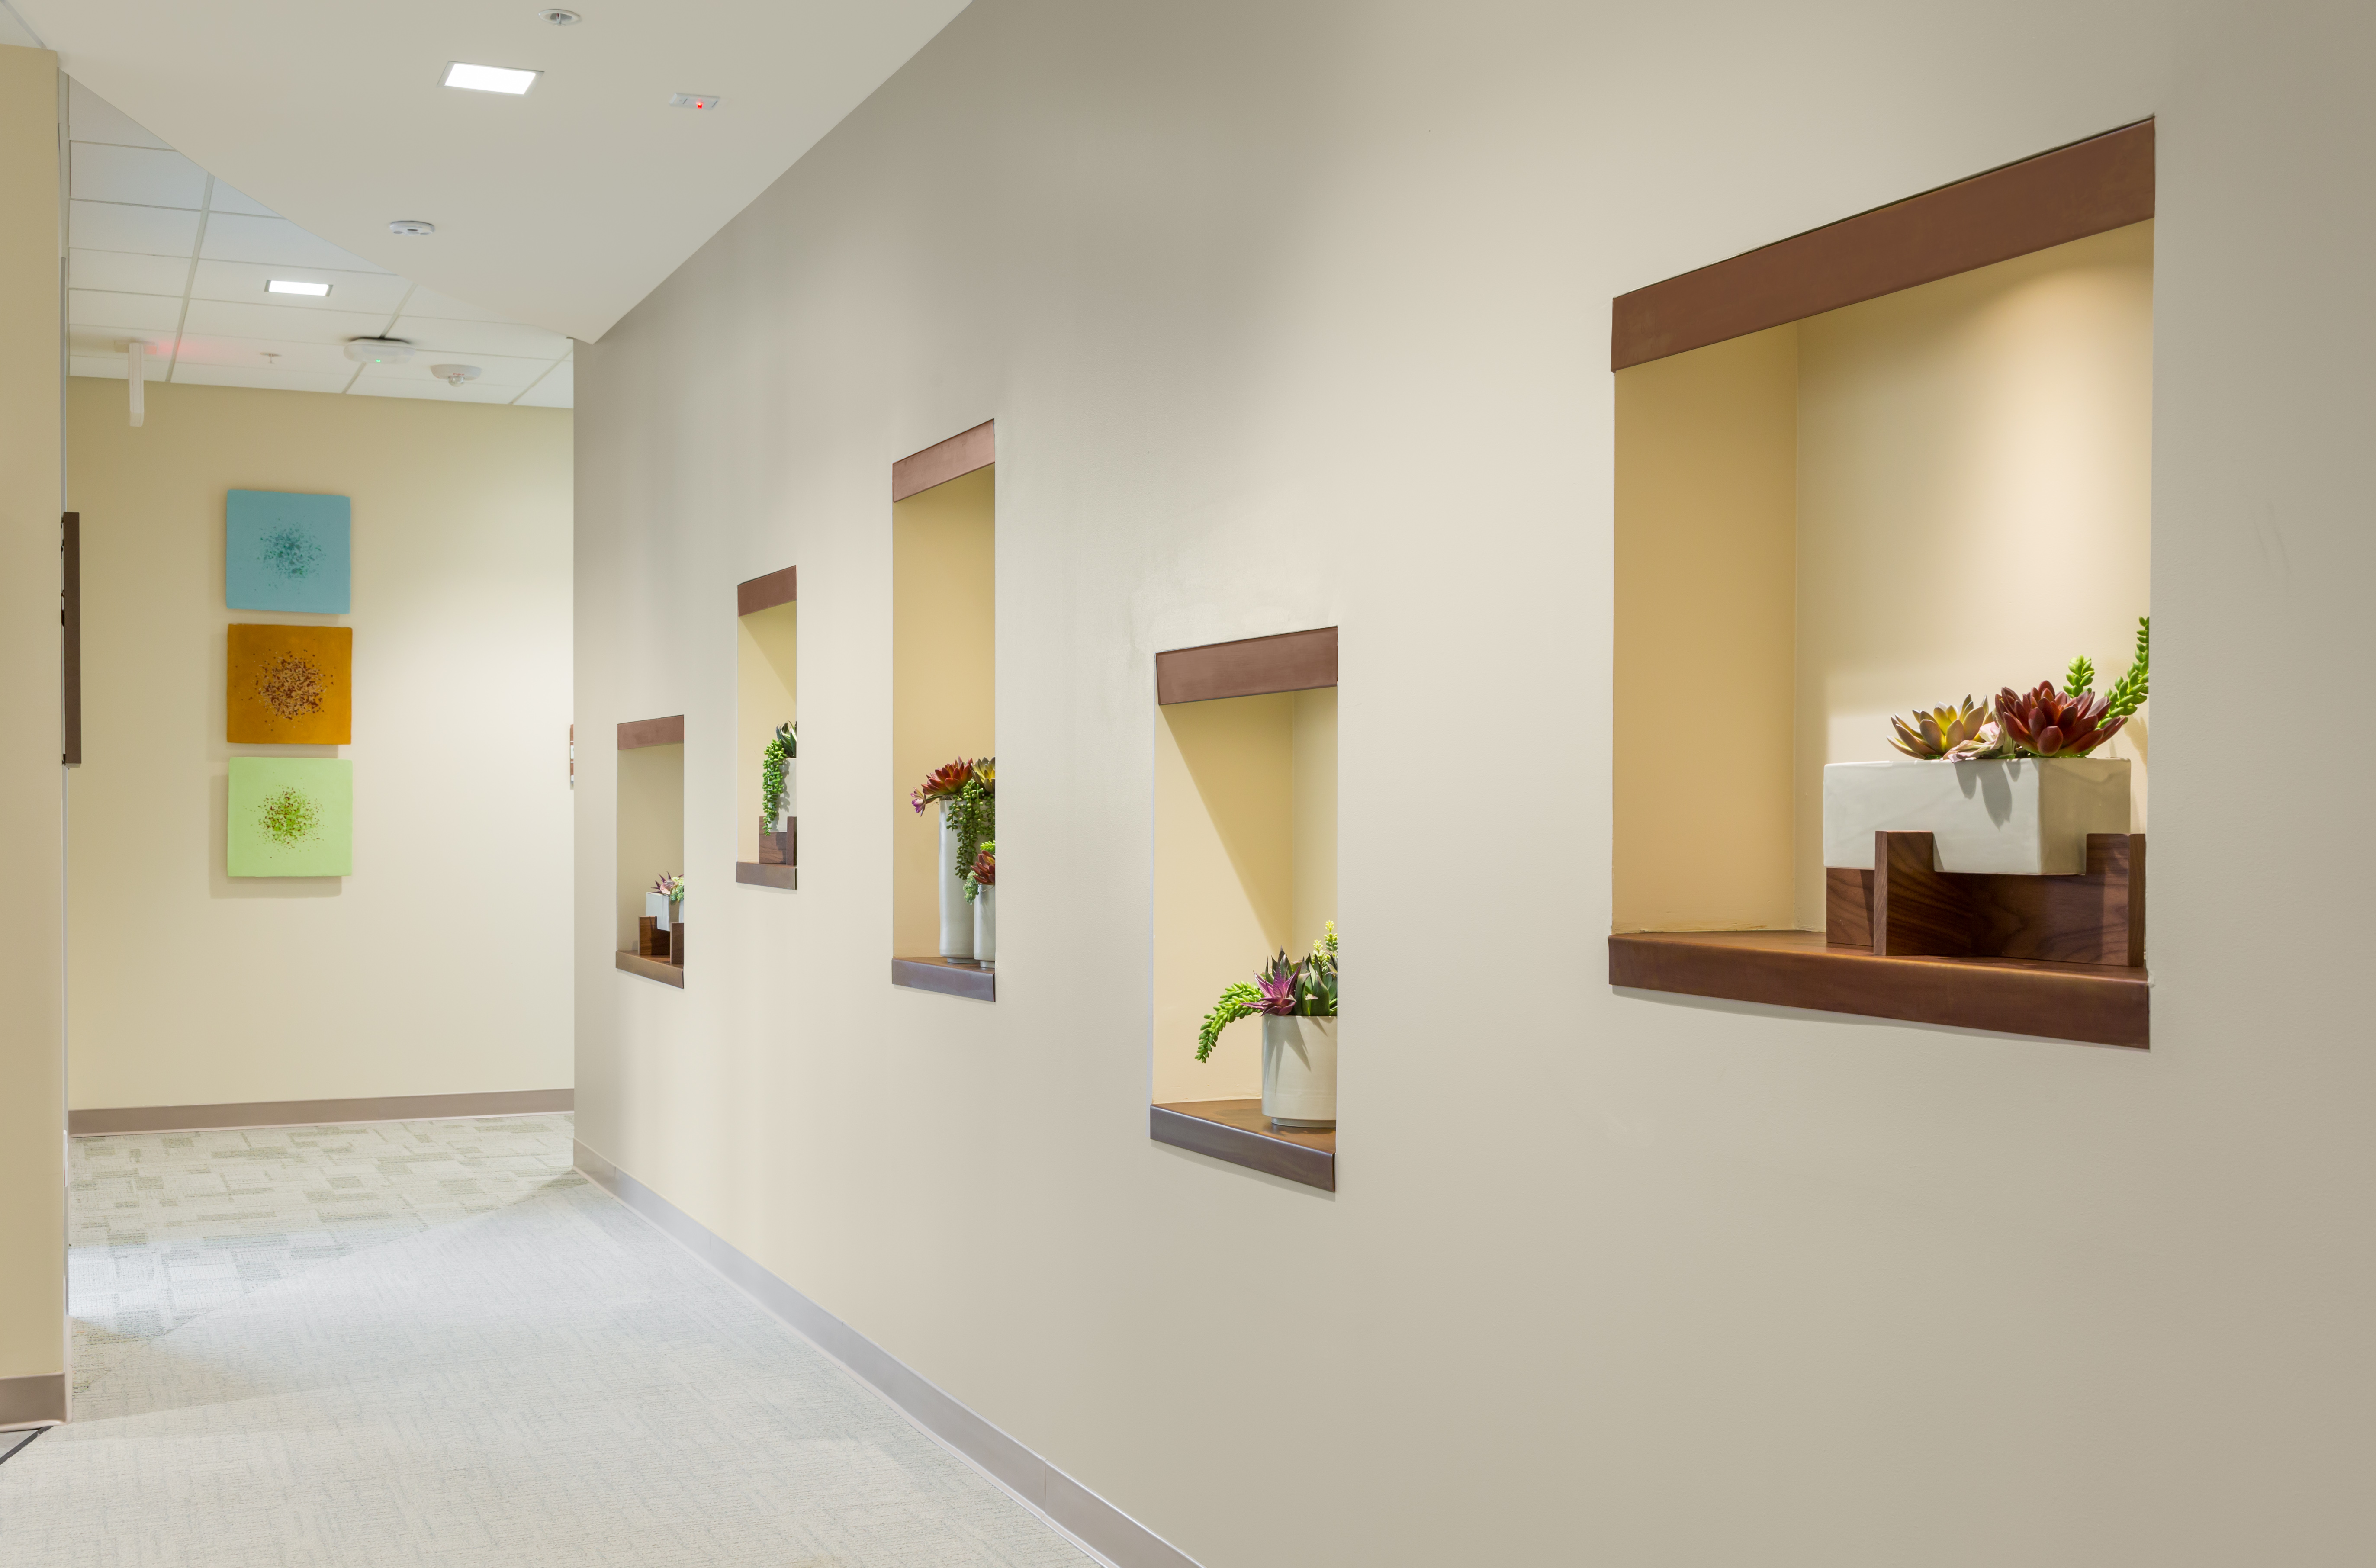 Inside the Los Angeles center hallway with planters and bright walls